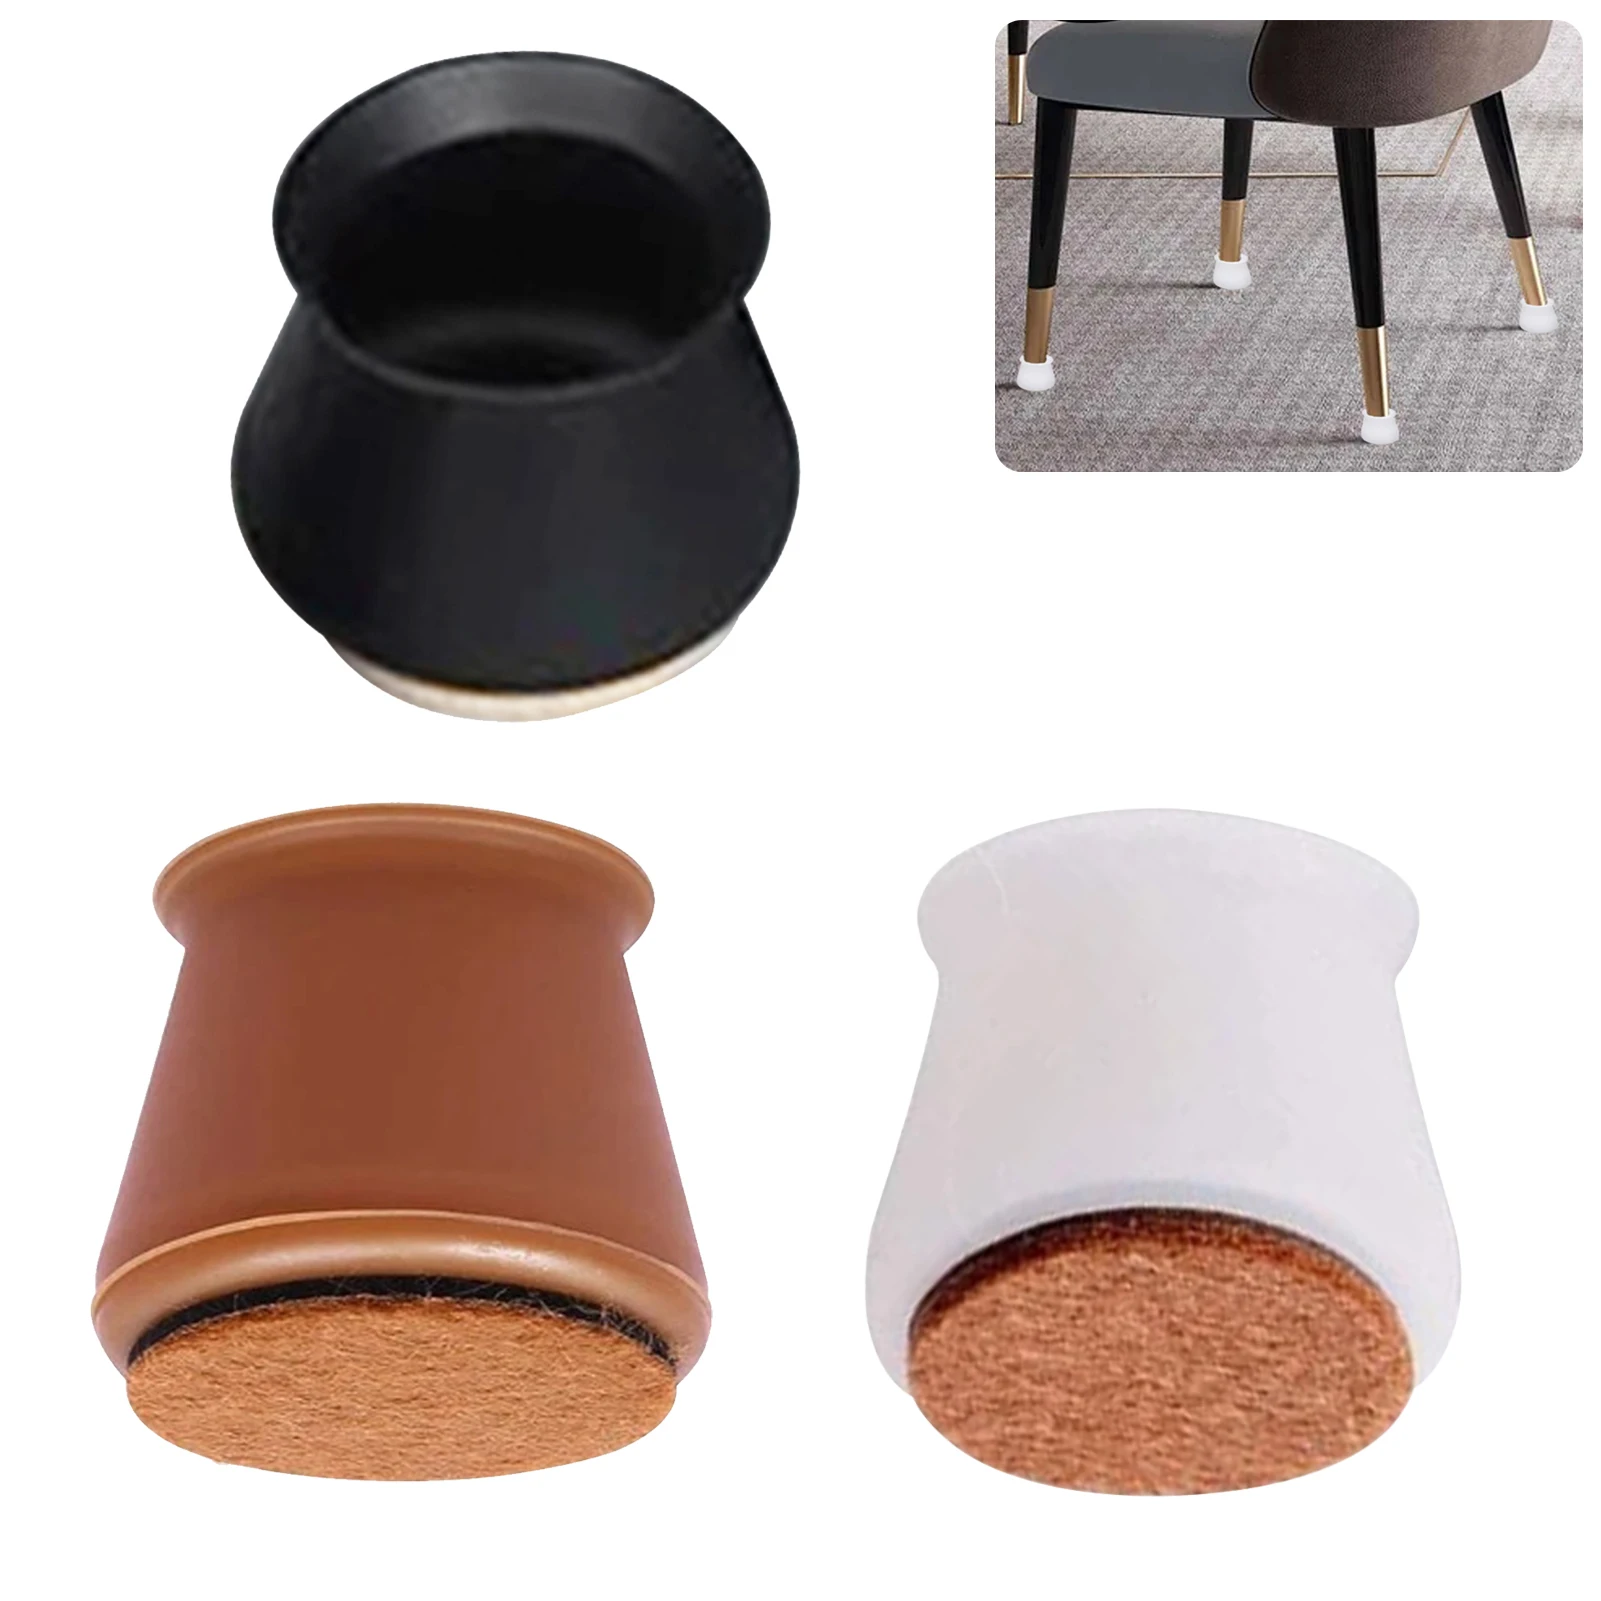 Silicone Chair Leg Protectors With Felt For Hardwood Floors Elastic Leg Cover Pad For Protecting Floors From Scratches And Noise